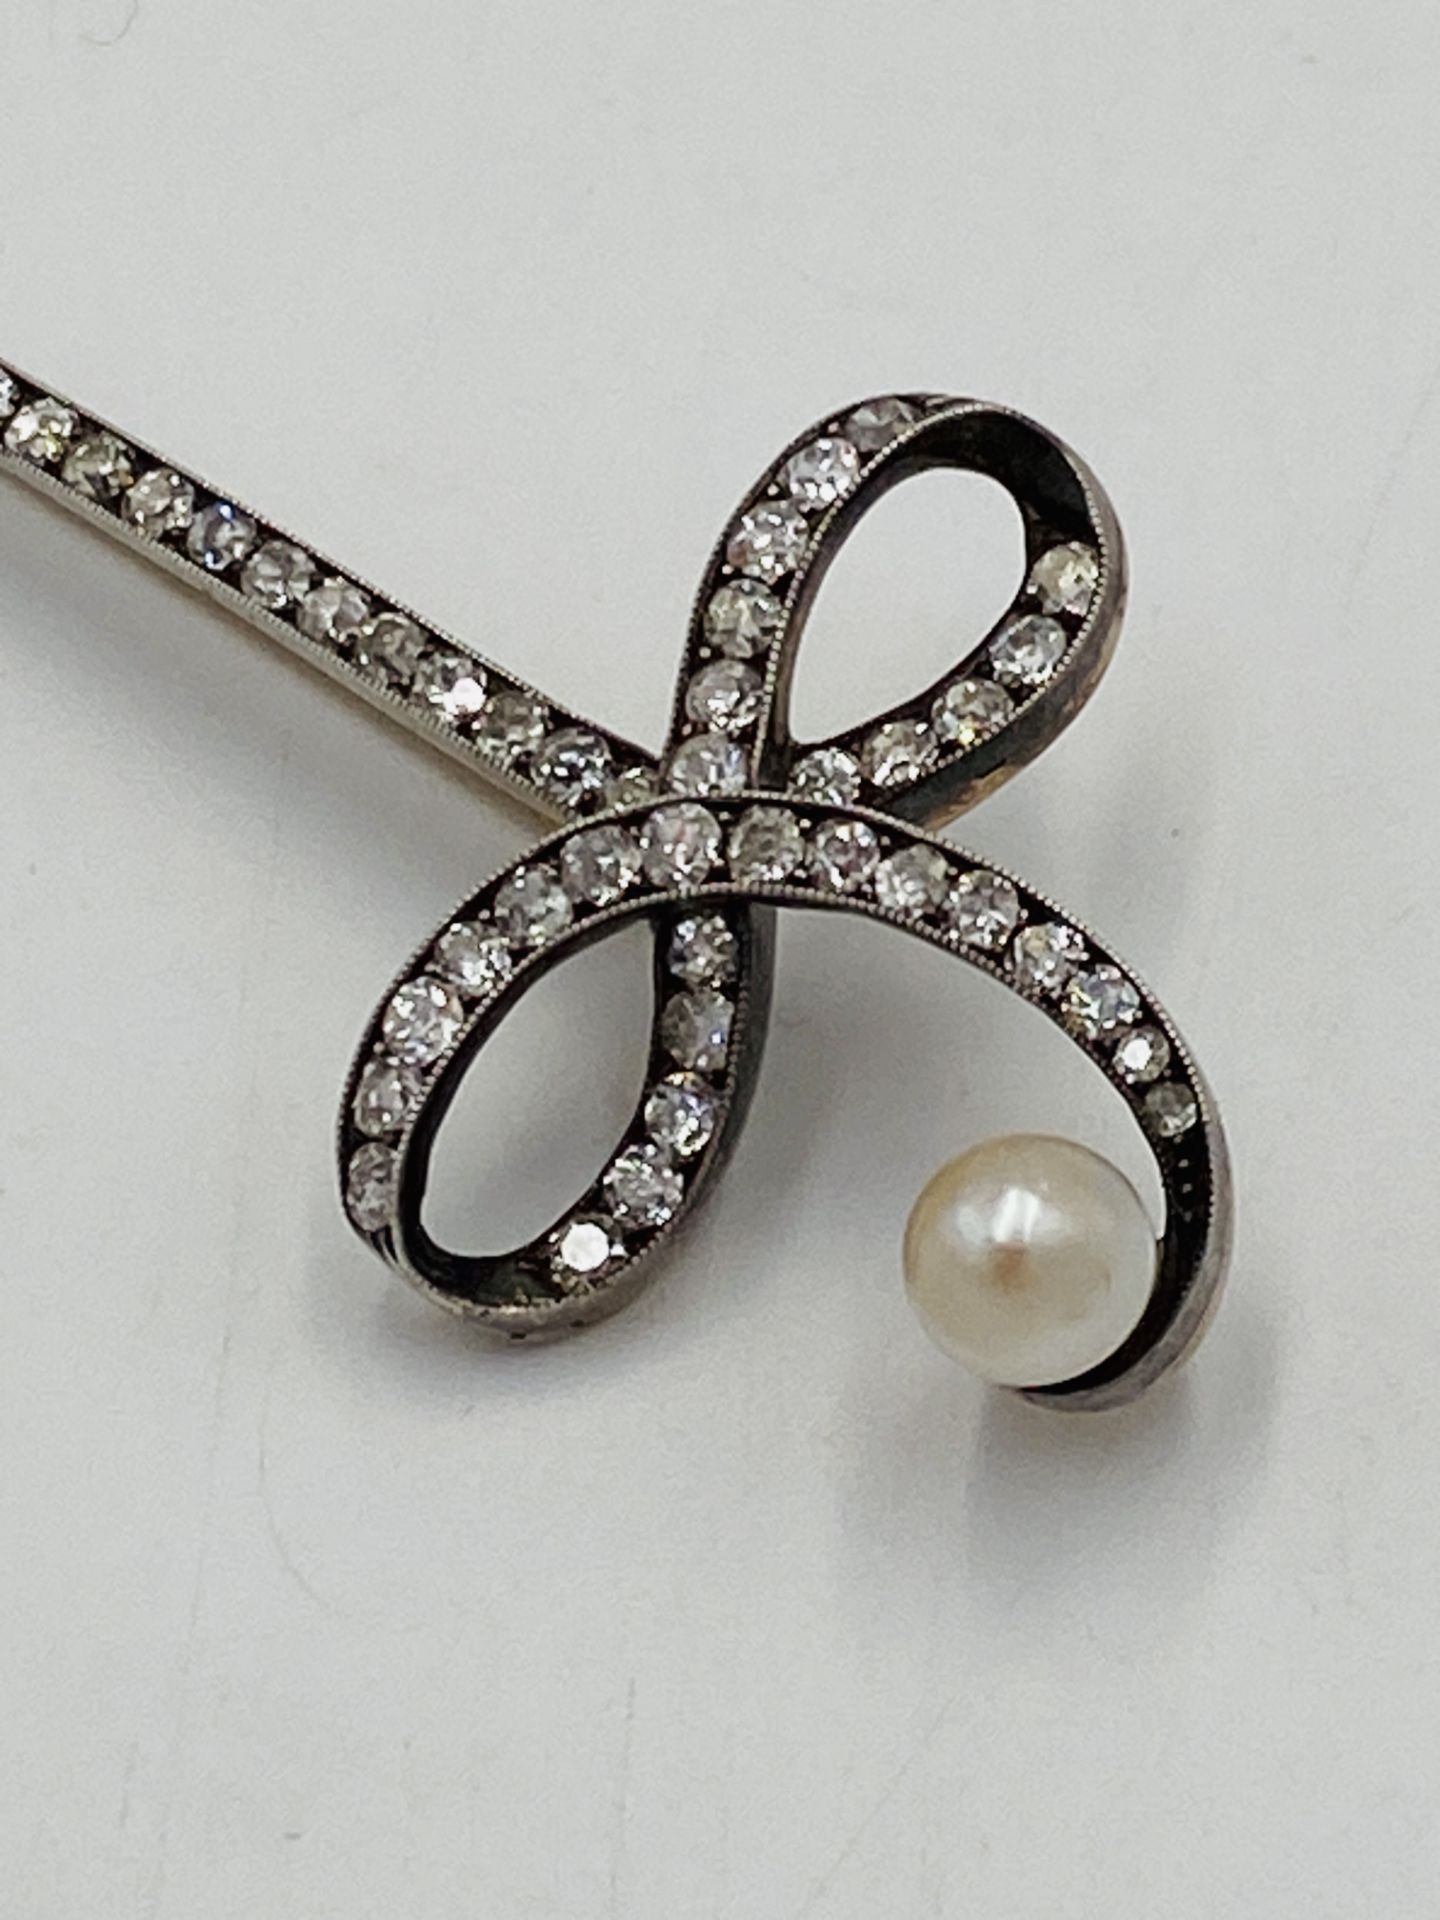 Gold, diamond and pearl brooch - Image 2 of 7